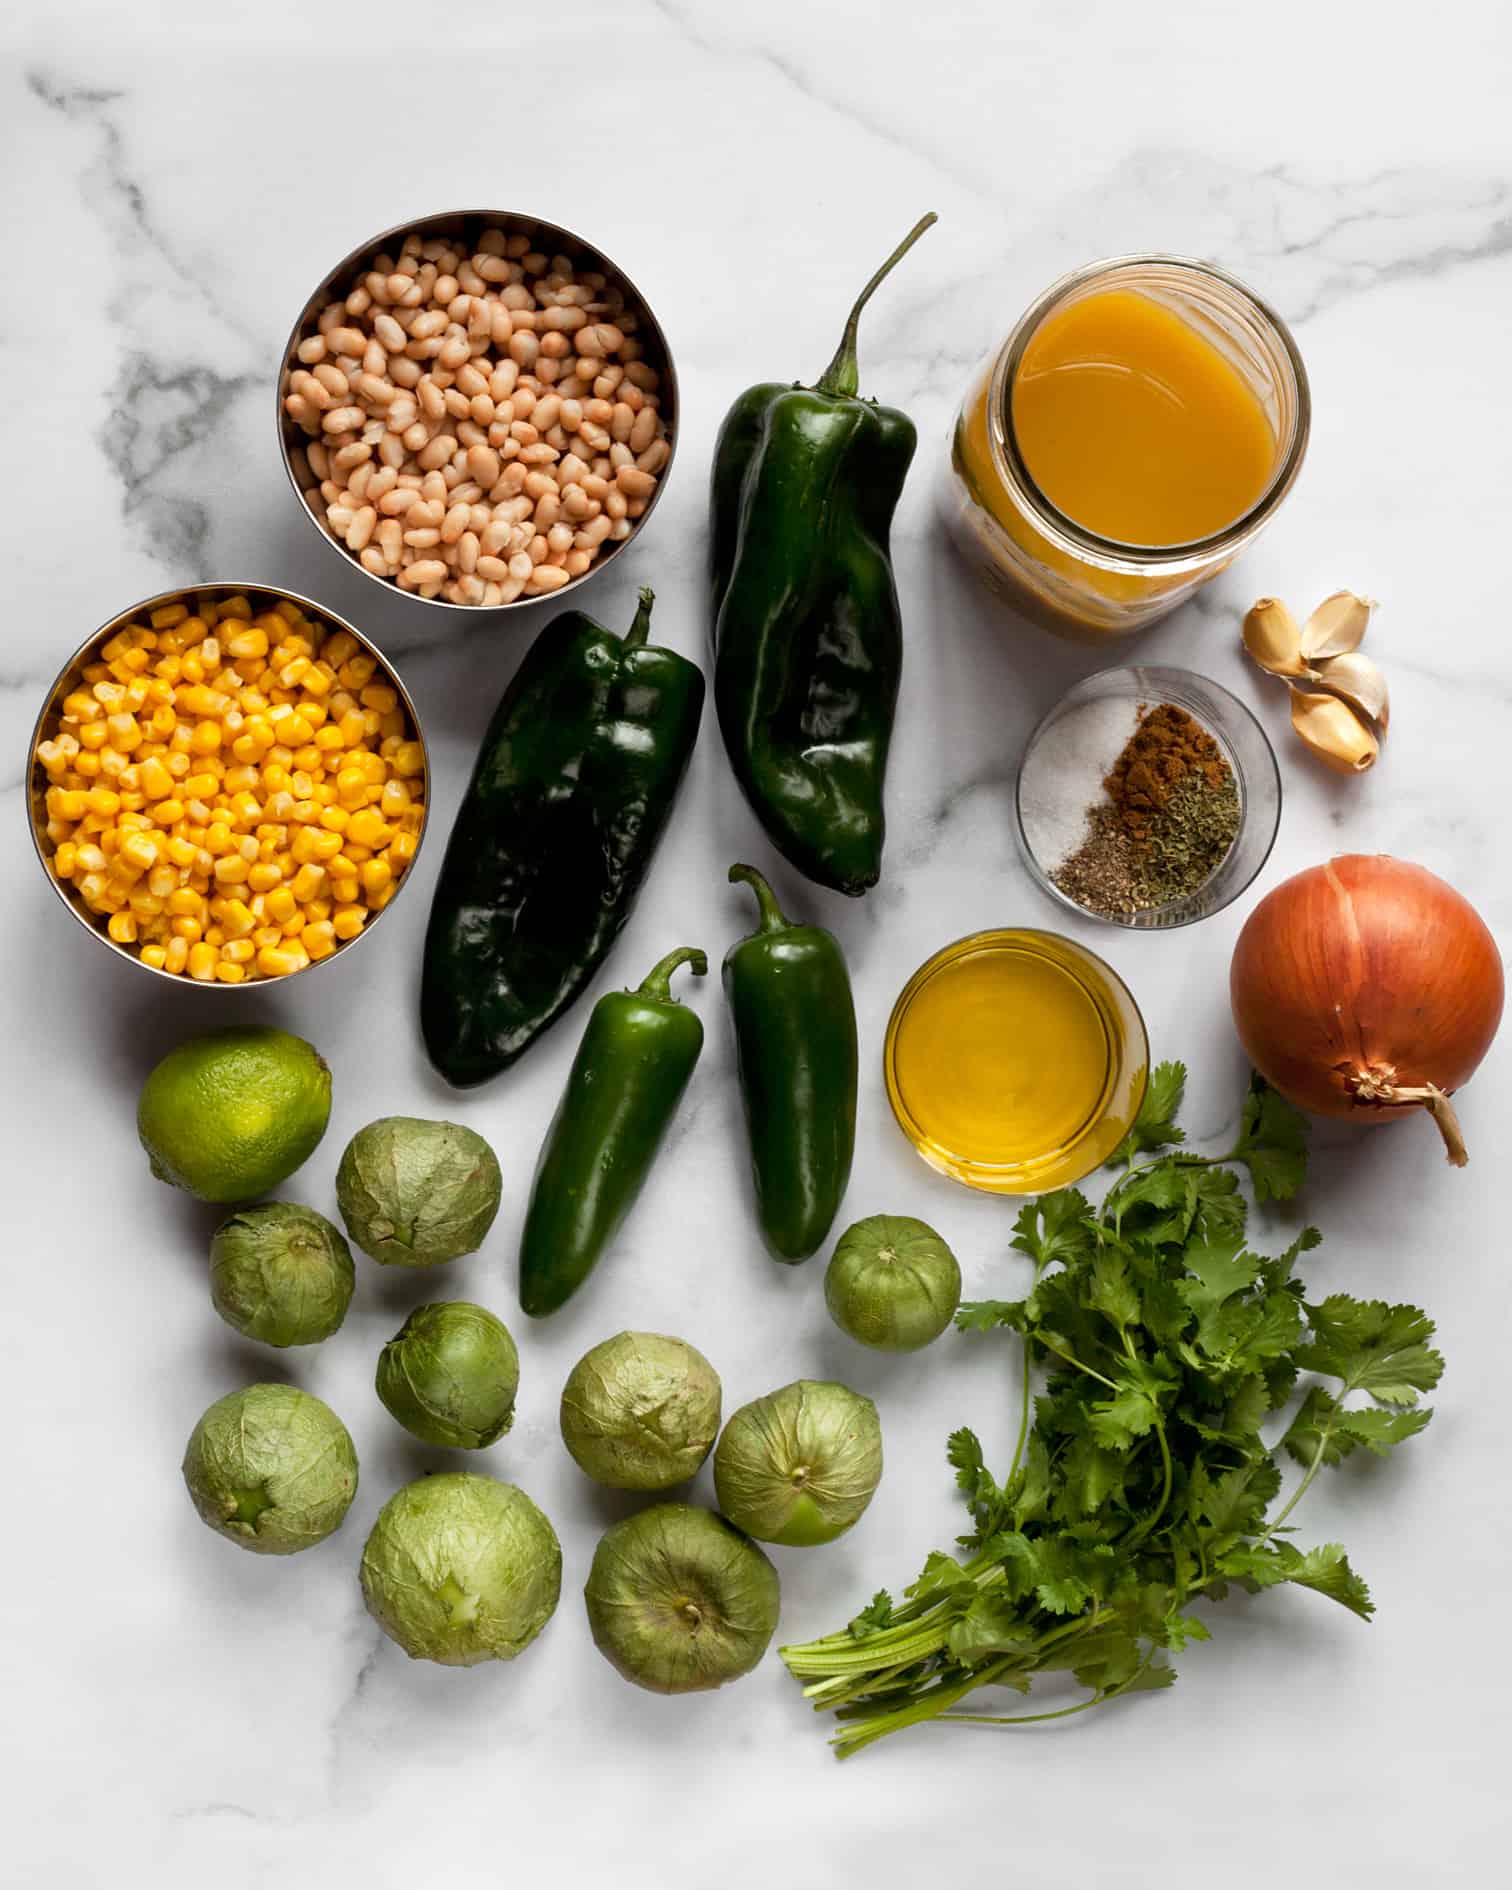 Ingredients including tomatillos, poblano peppers and jalapenos